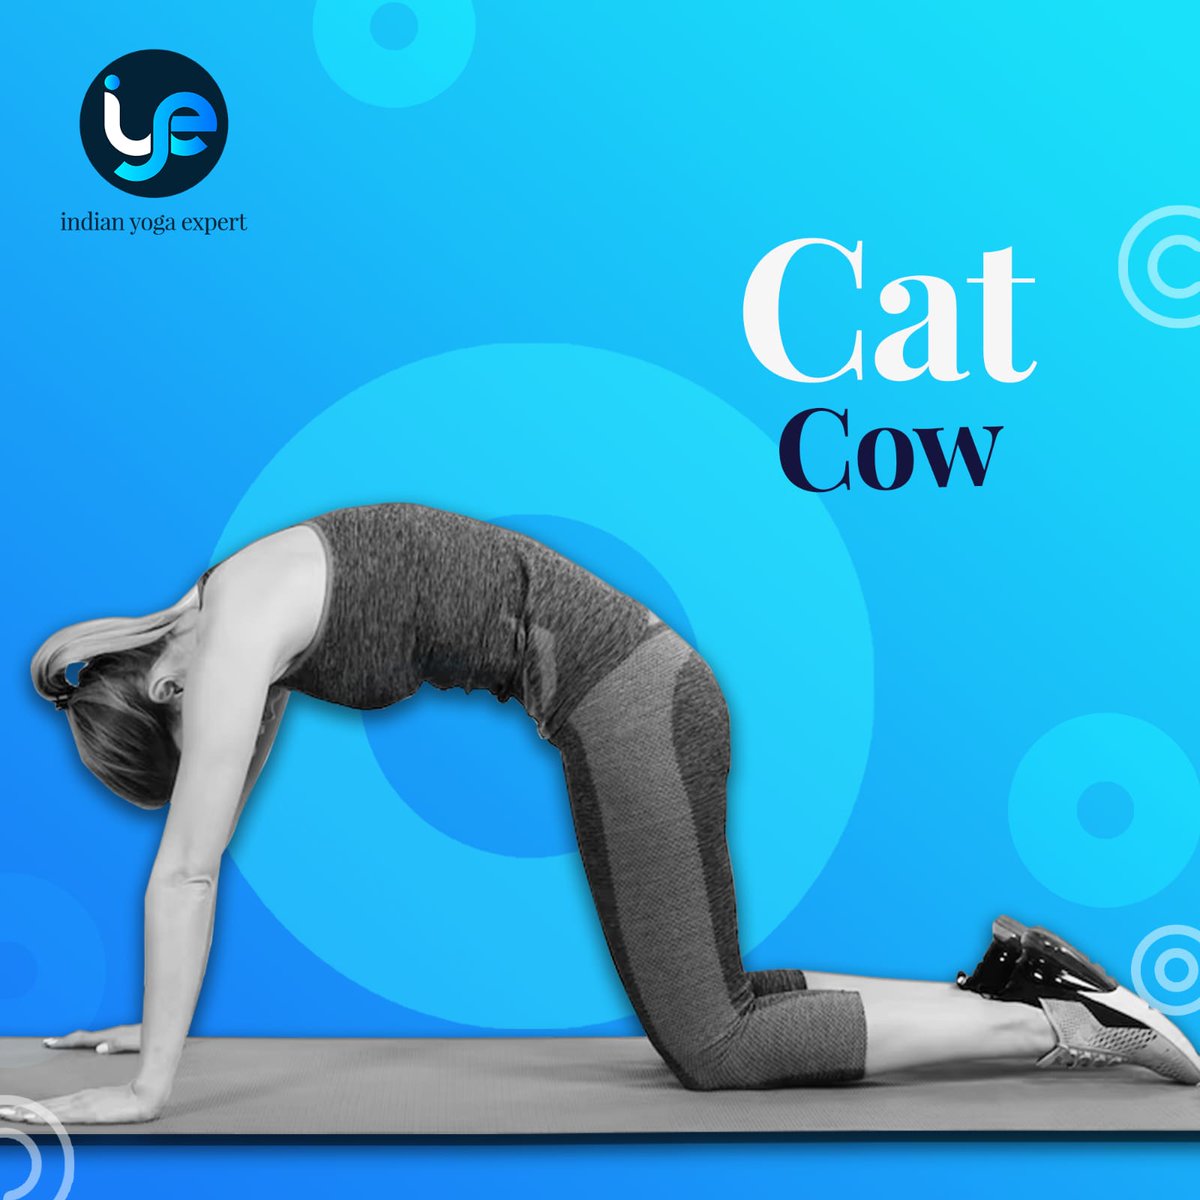 Purrfectly Aligned: Finding Harmony in the Cat Cow Pose

Interested to know more? Click on the link below.
lnkd.in/gjQ-afG7

#IndianYogaExpert #YogaExpert #Yoga #YogaTeacher 
#YogaTeachers #YogaPortal #YogaBenefits #Fitness #BenefitsOfYoga #yogainstructor #immunity #diet